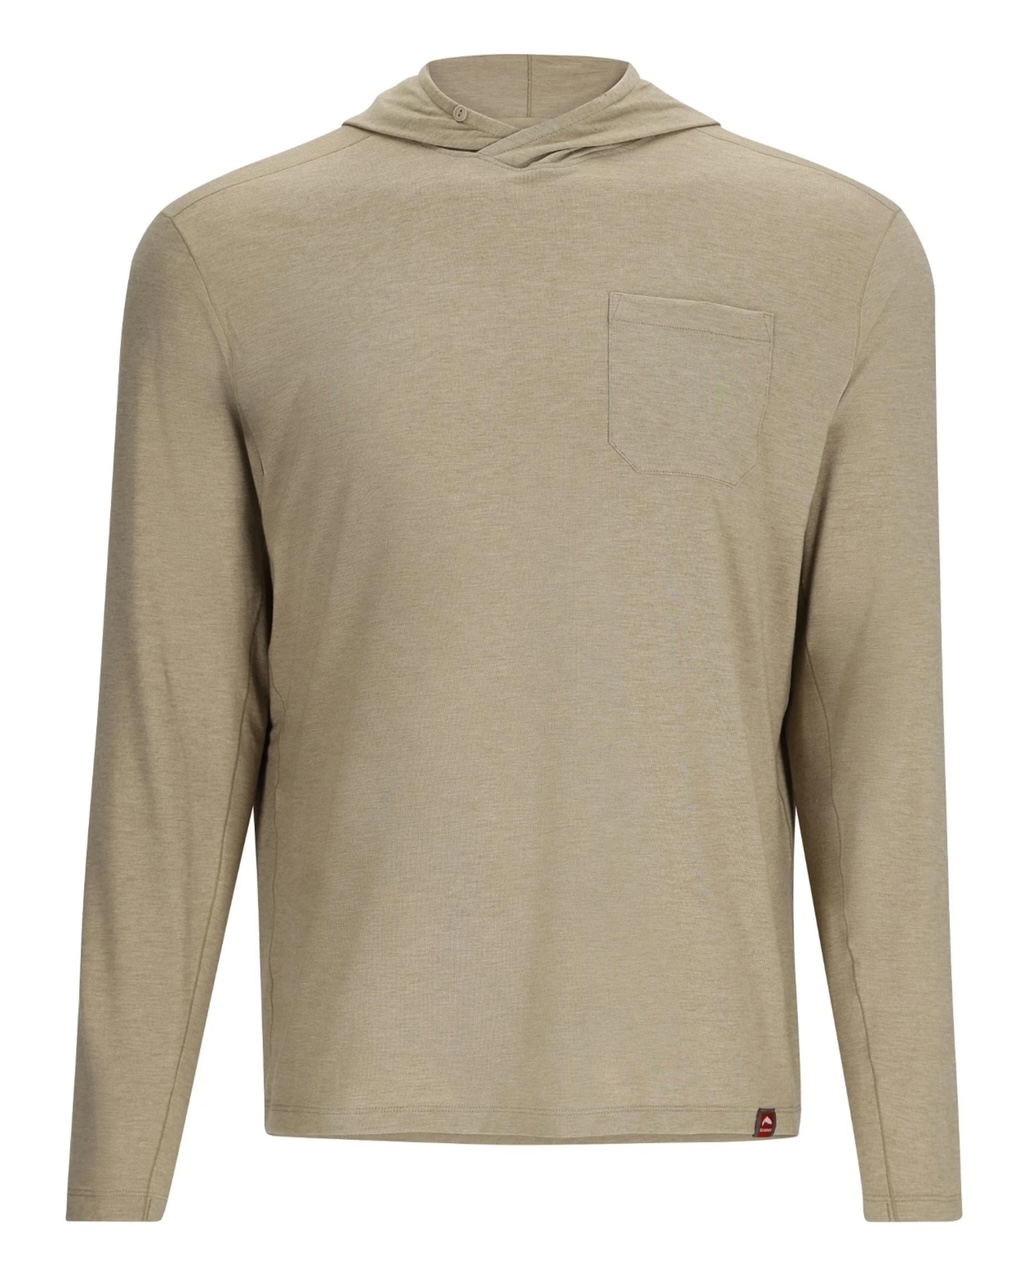 Simms M's Glades Hoody - Stone Heather - Large